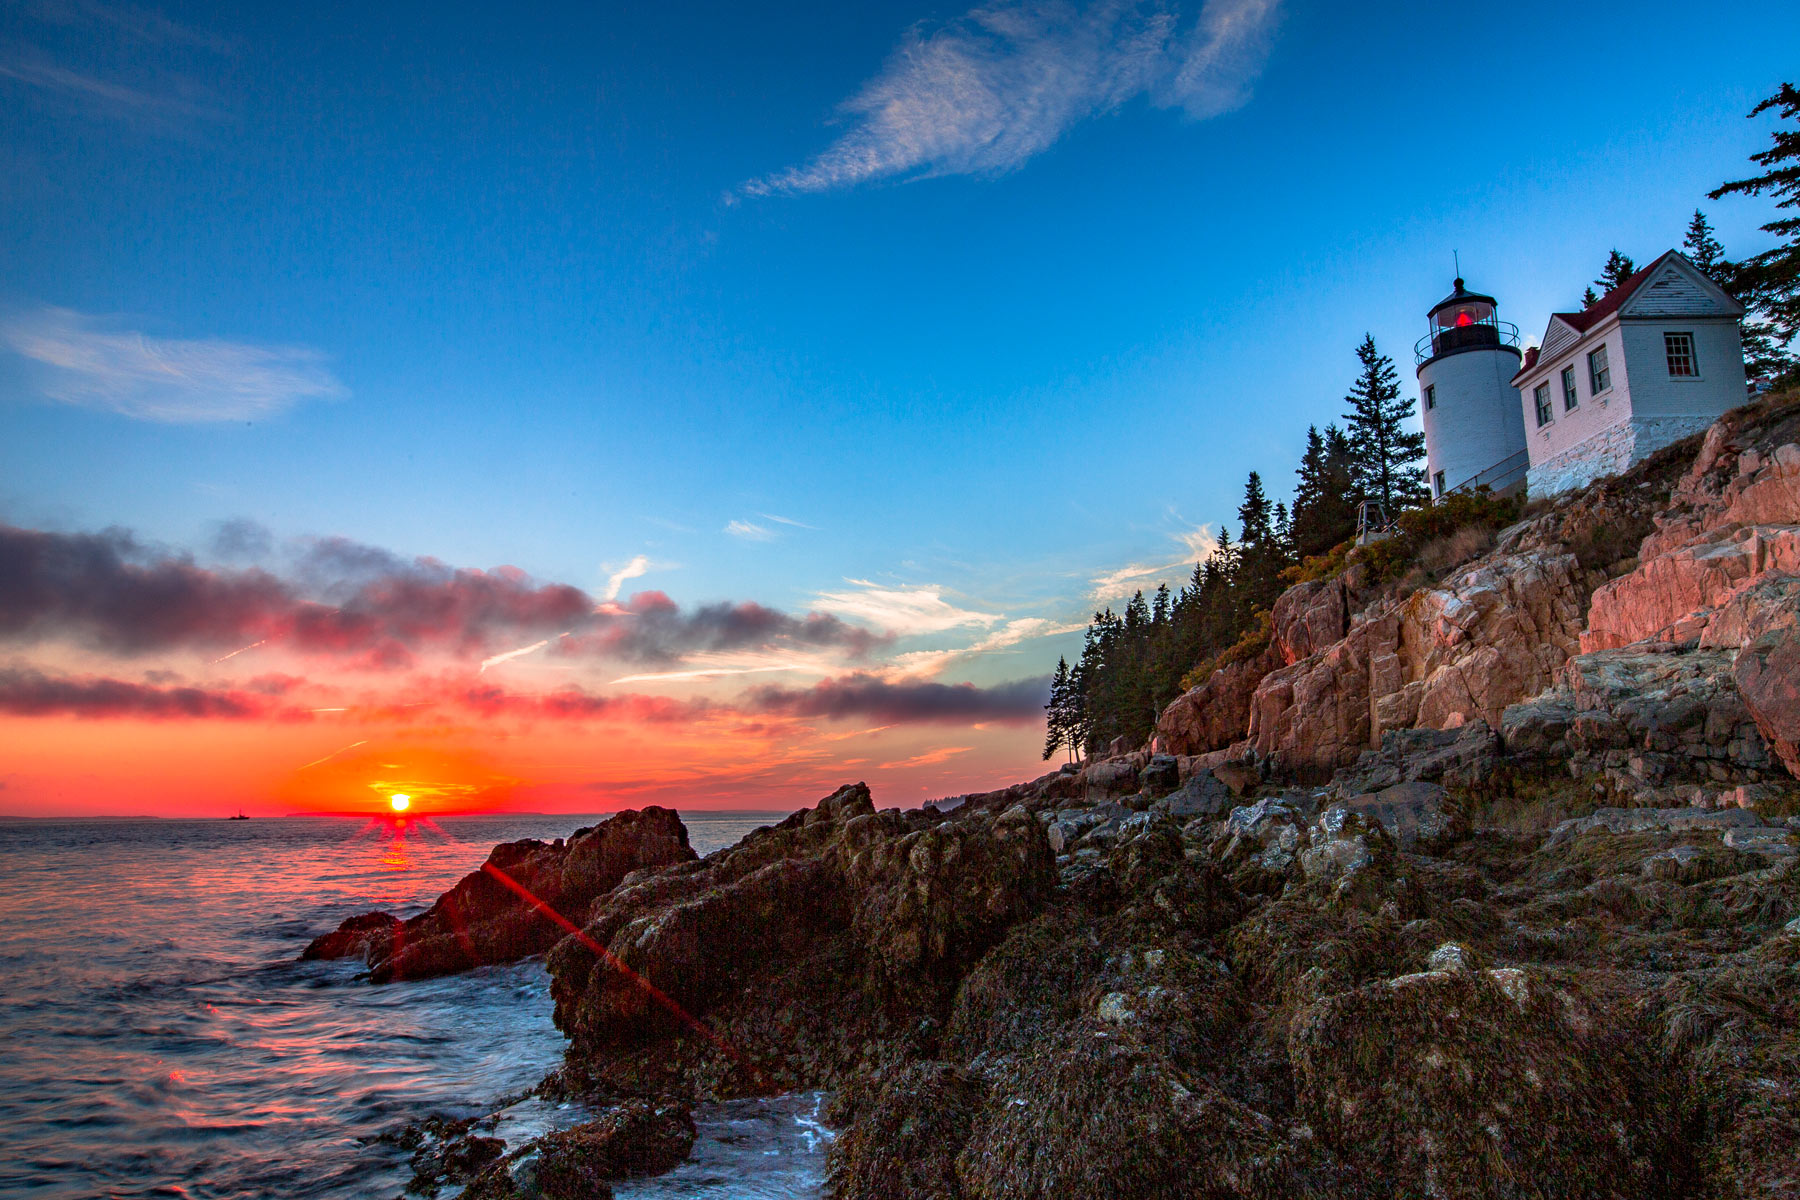 Here’s 5+ Incredible Places To Visit On Your Next New England Road Trip